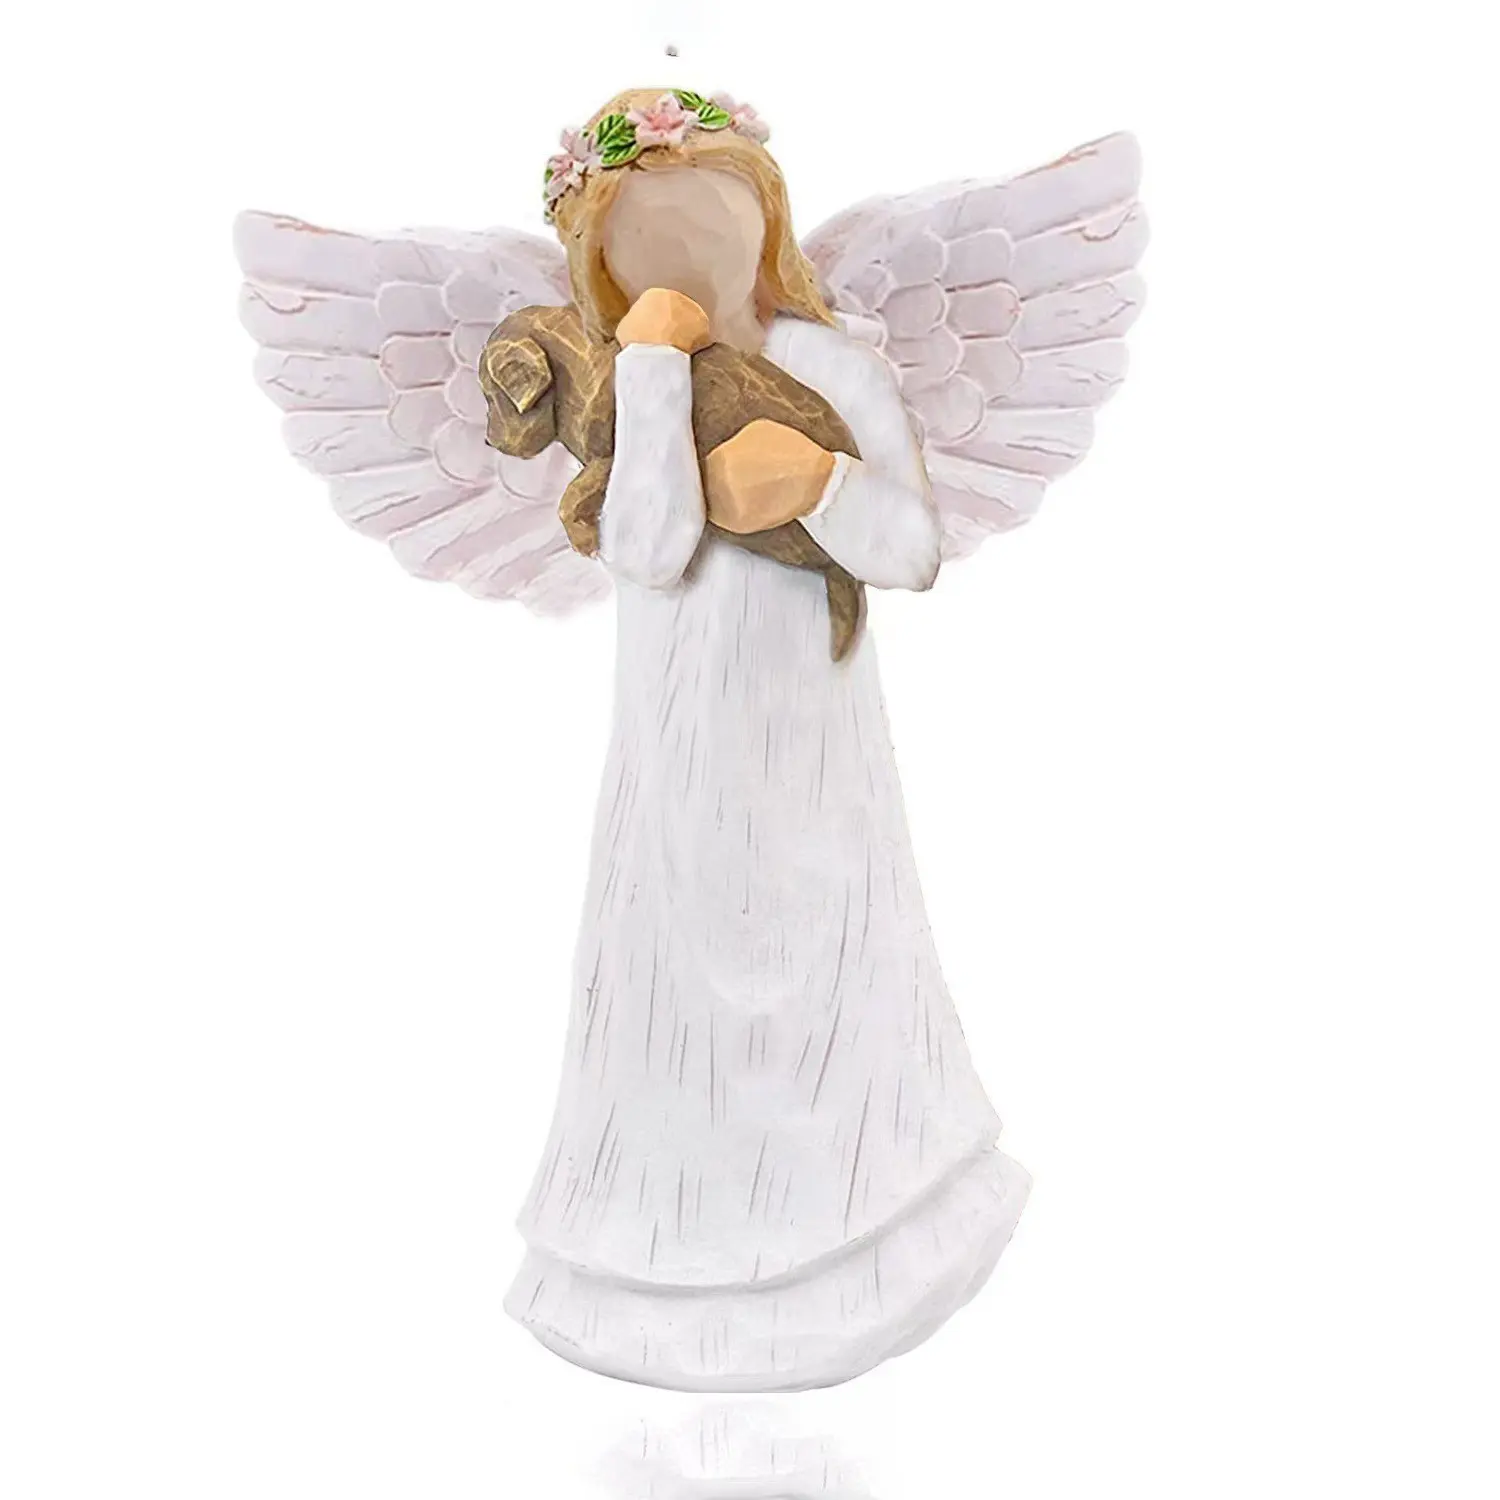 Creative resin crafts holding dog angel young girl sculpture figure model resin decoration